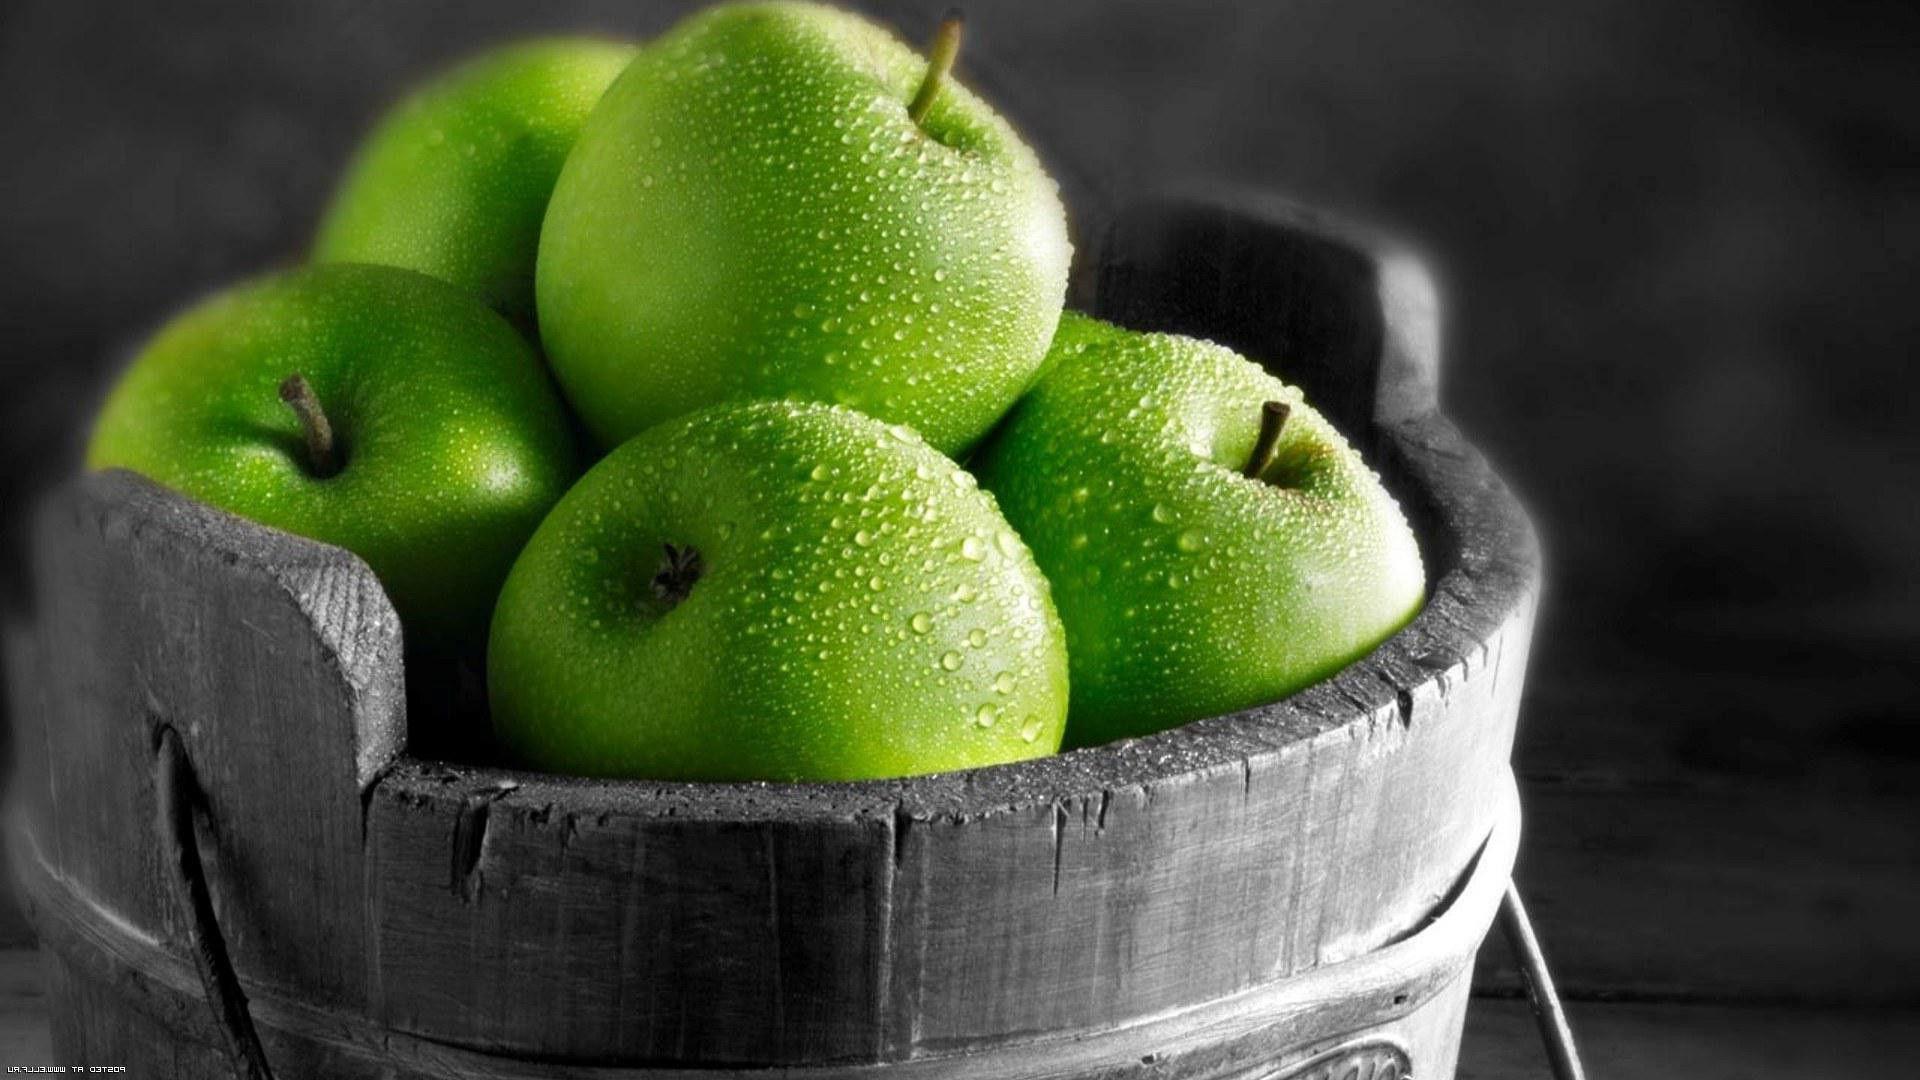 green apple wallpaper 1080p Search Engine